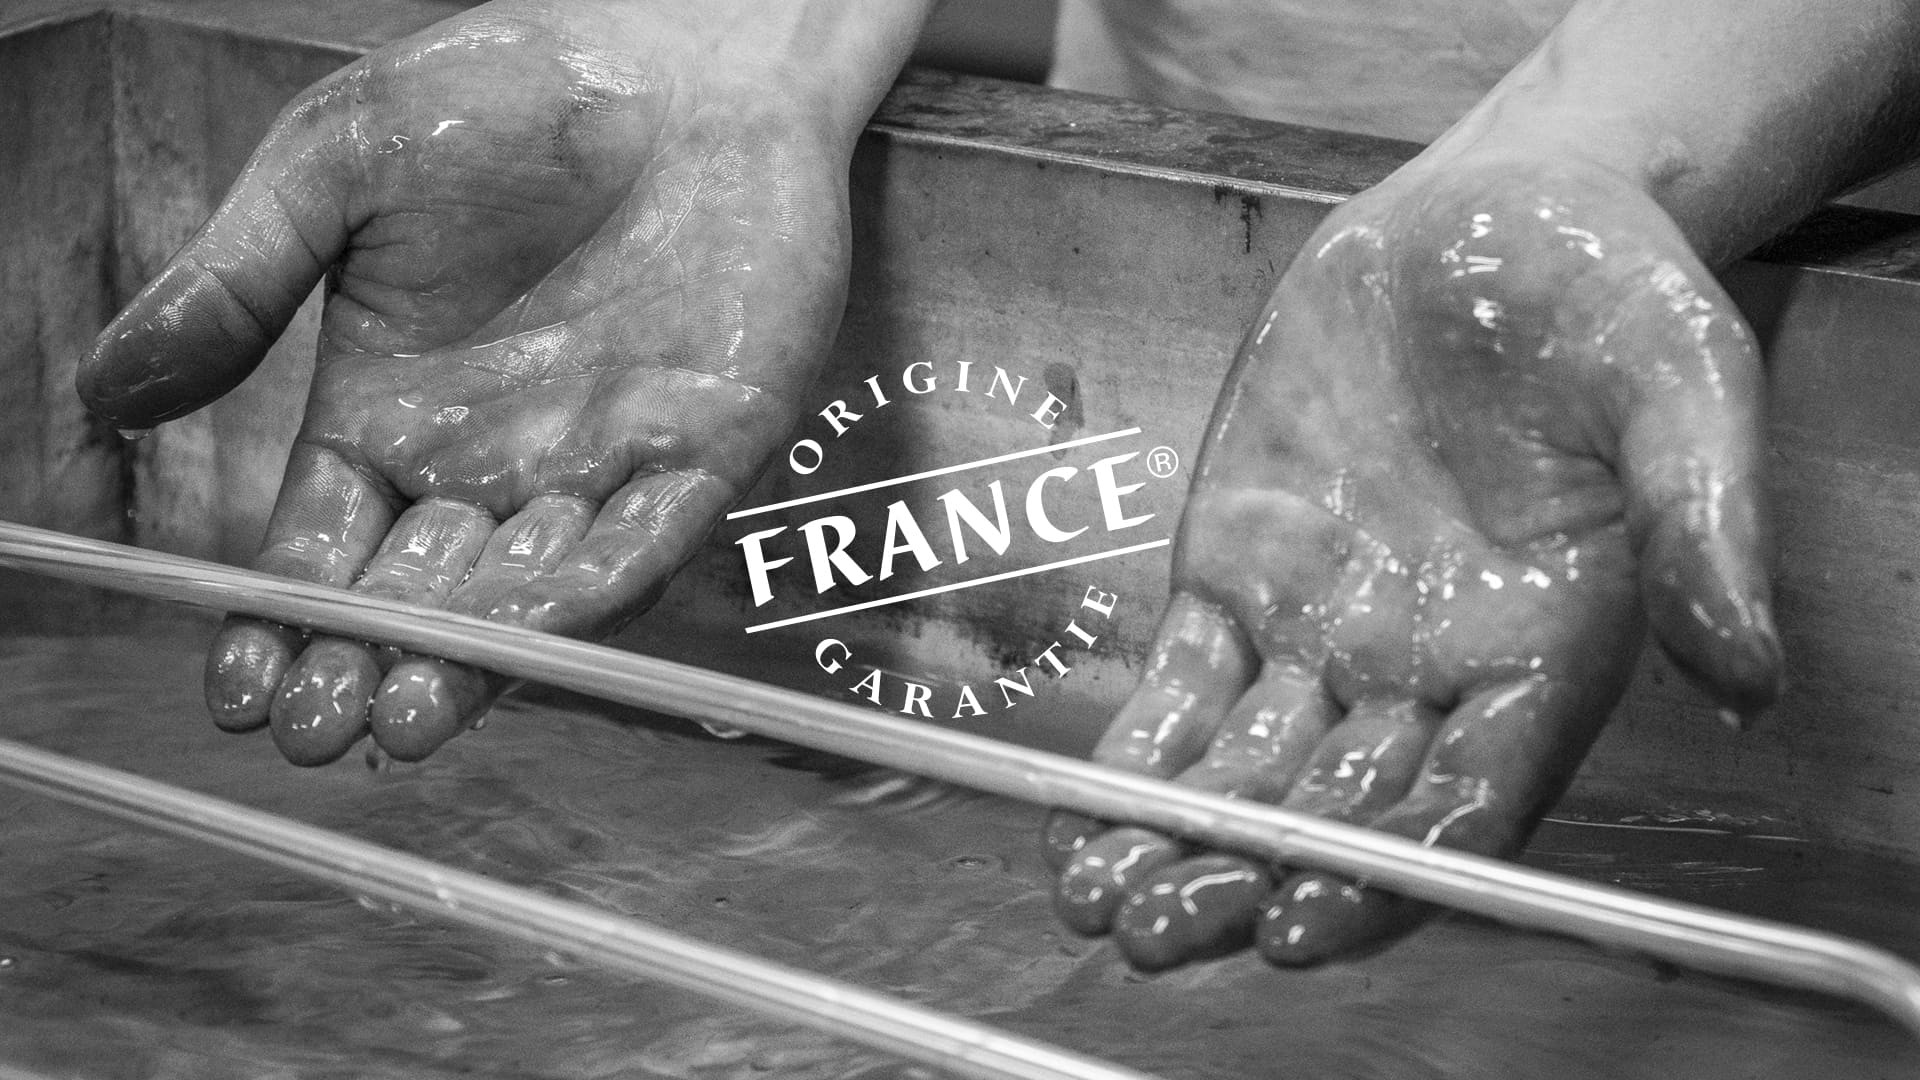 Made in France - Only the Origine France Garantie label certifies production in France. - Obtained in 2012 by EuroCave